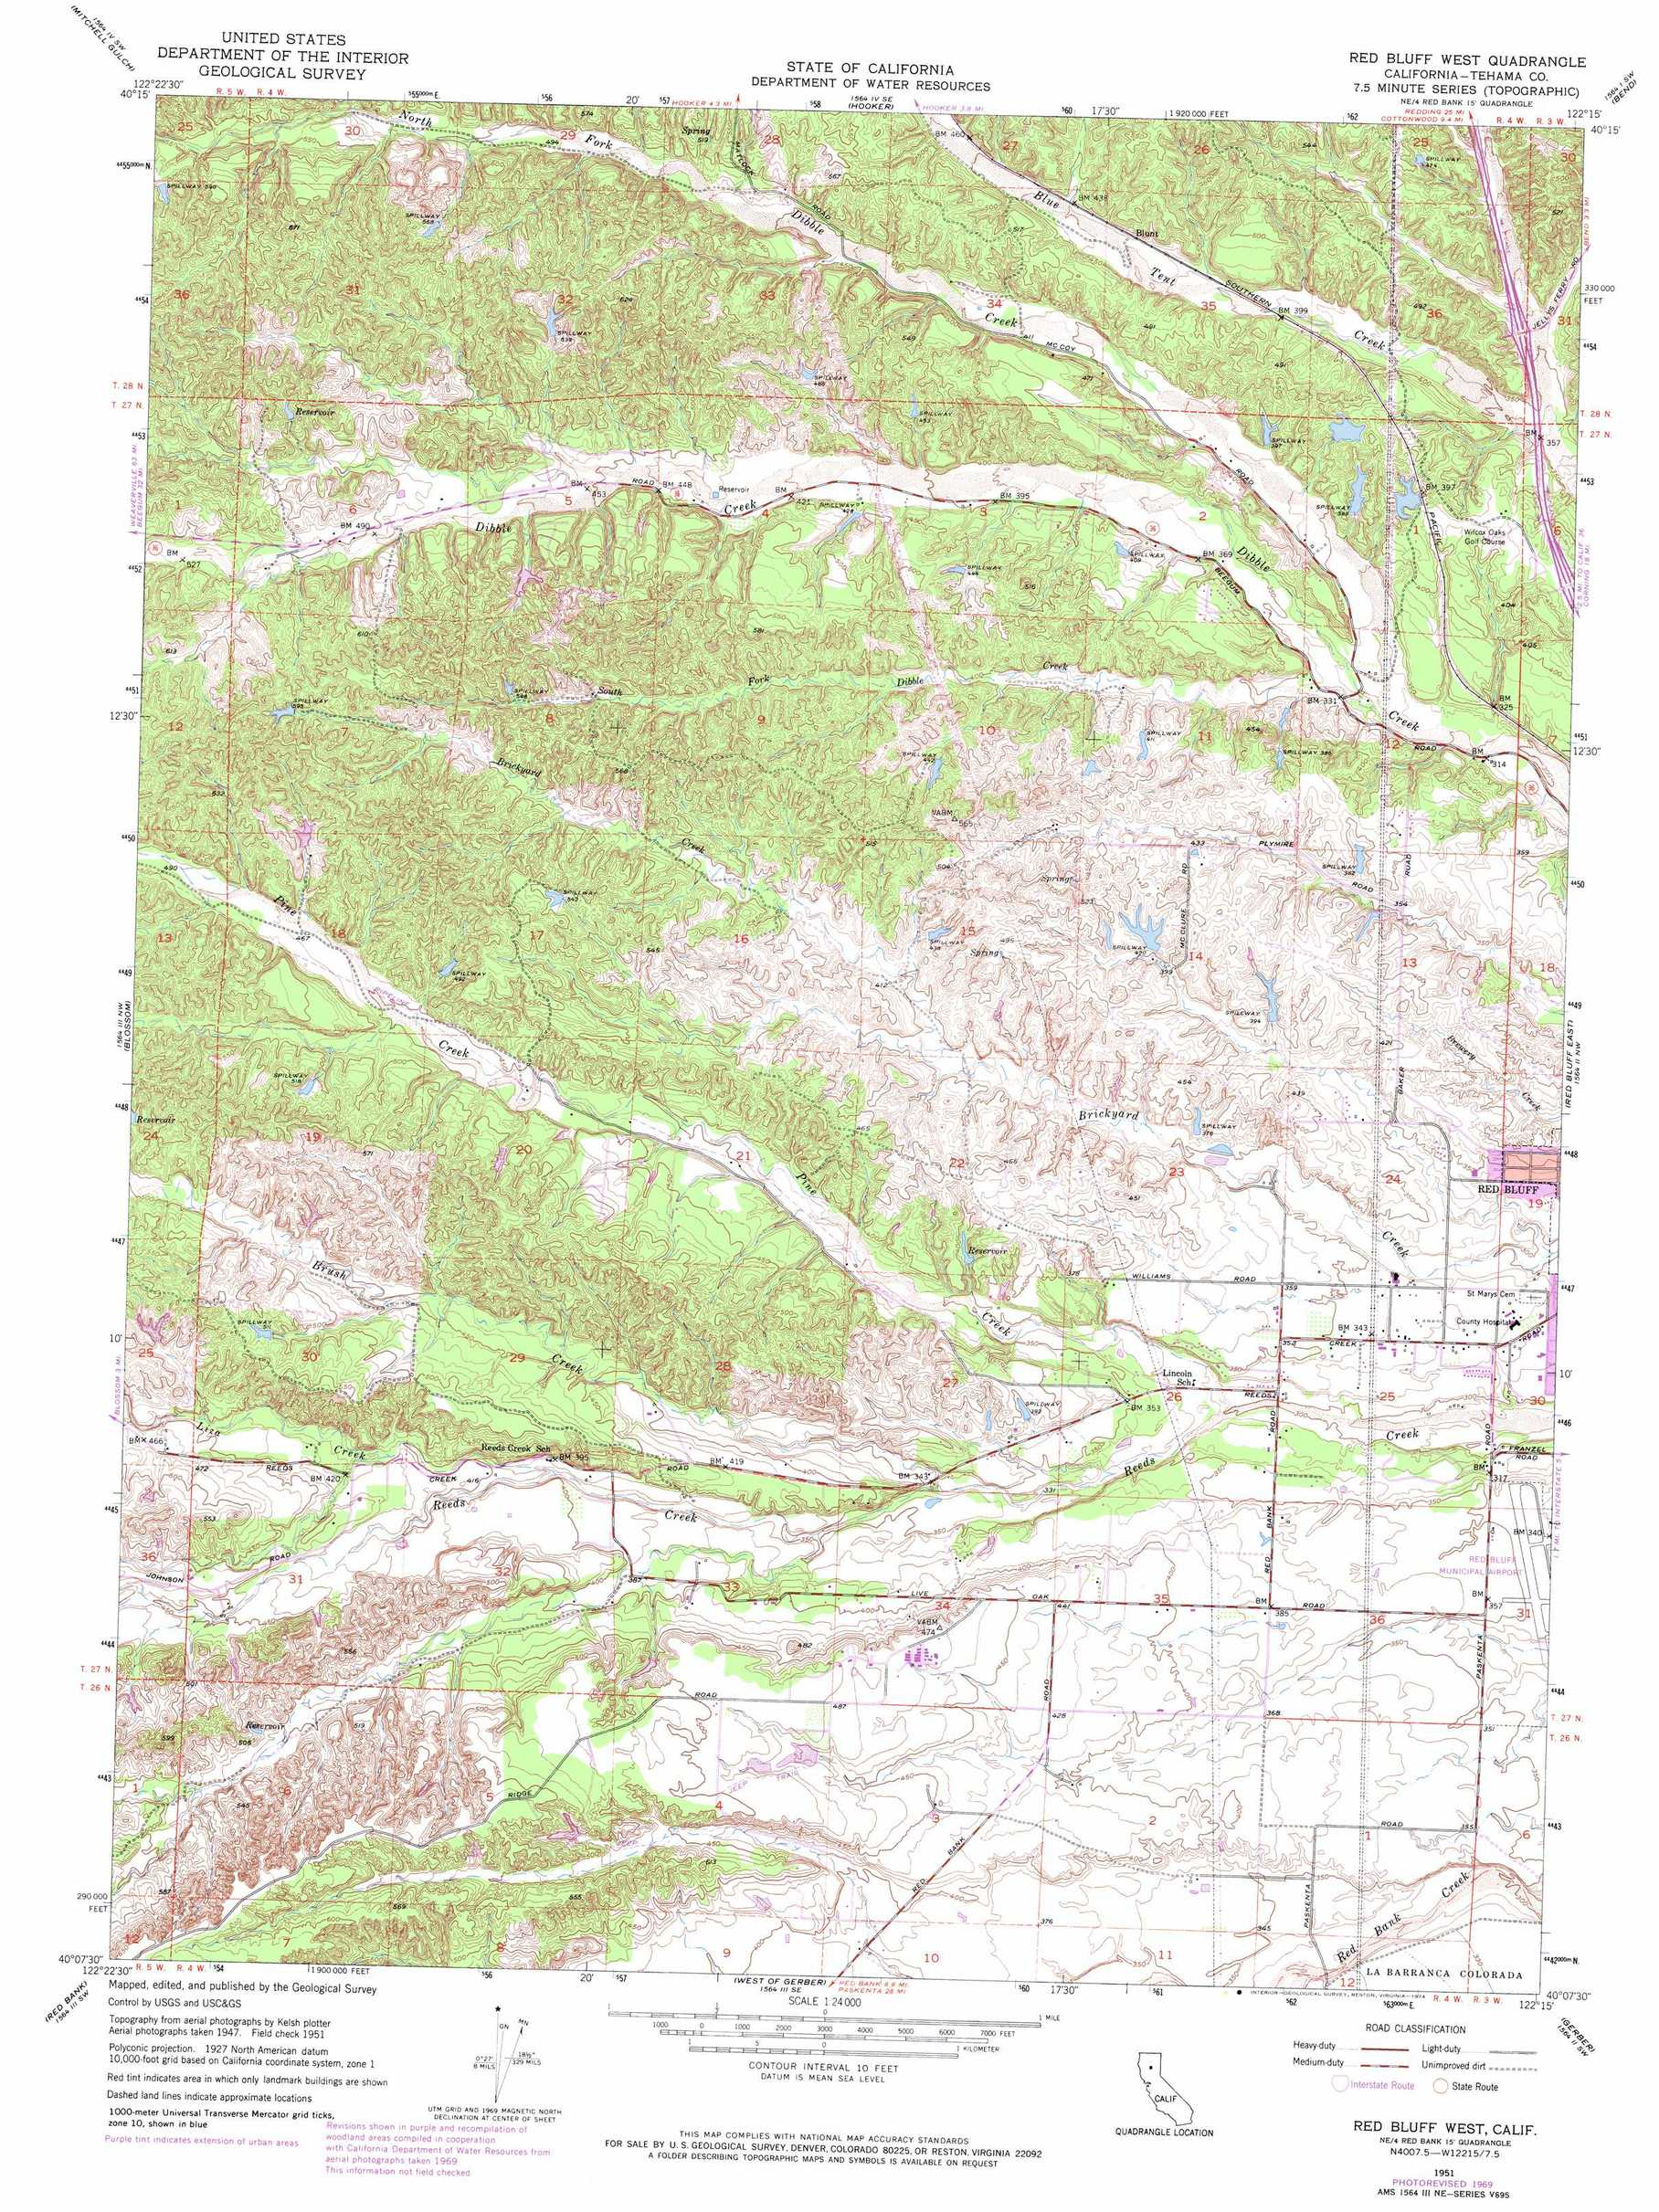 Red Bluff West Topographic Map, Ca - Usgs Topo Quad 40122B3 - Ono California Map